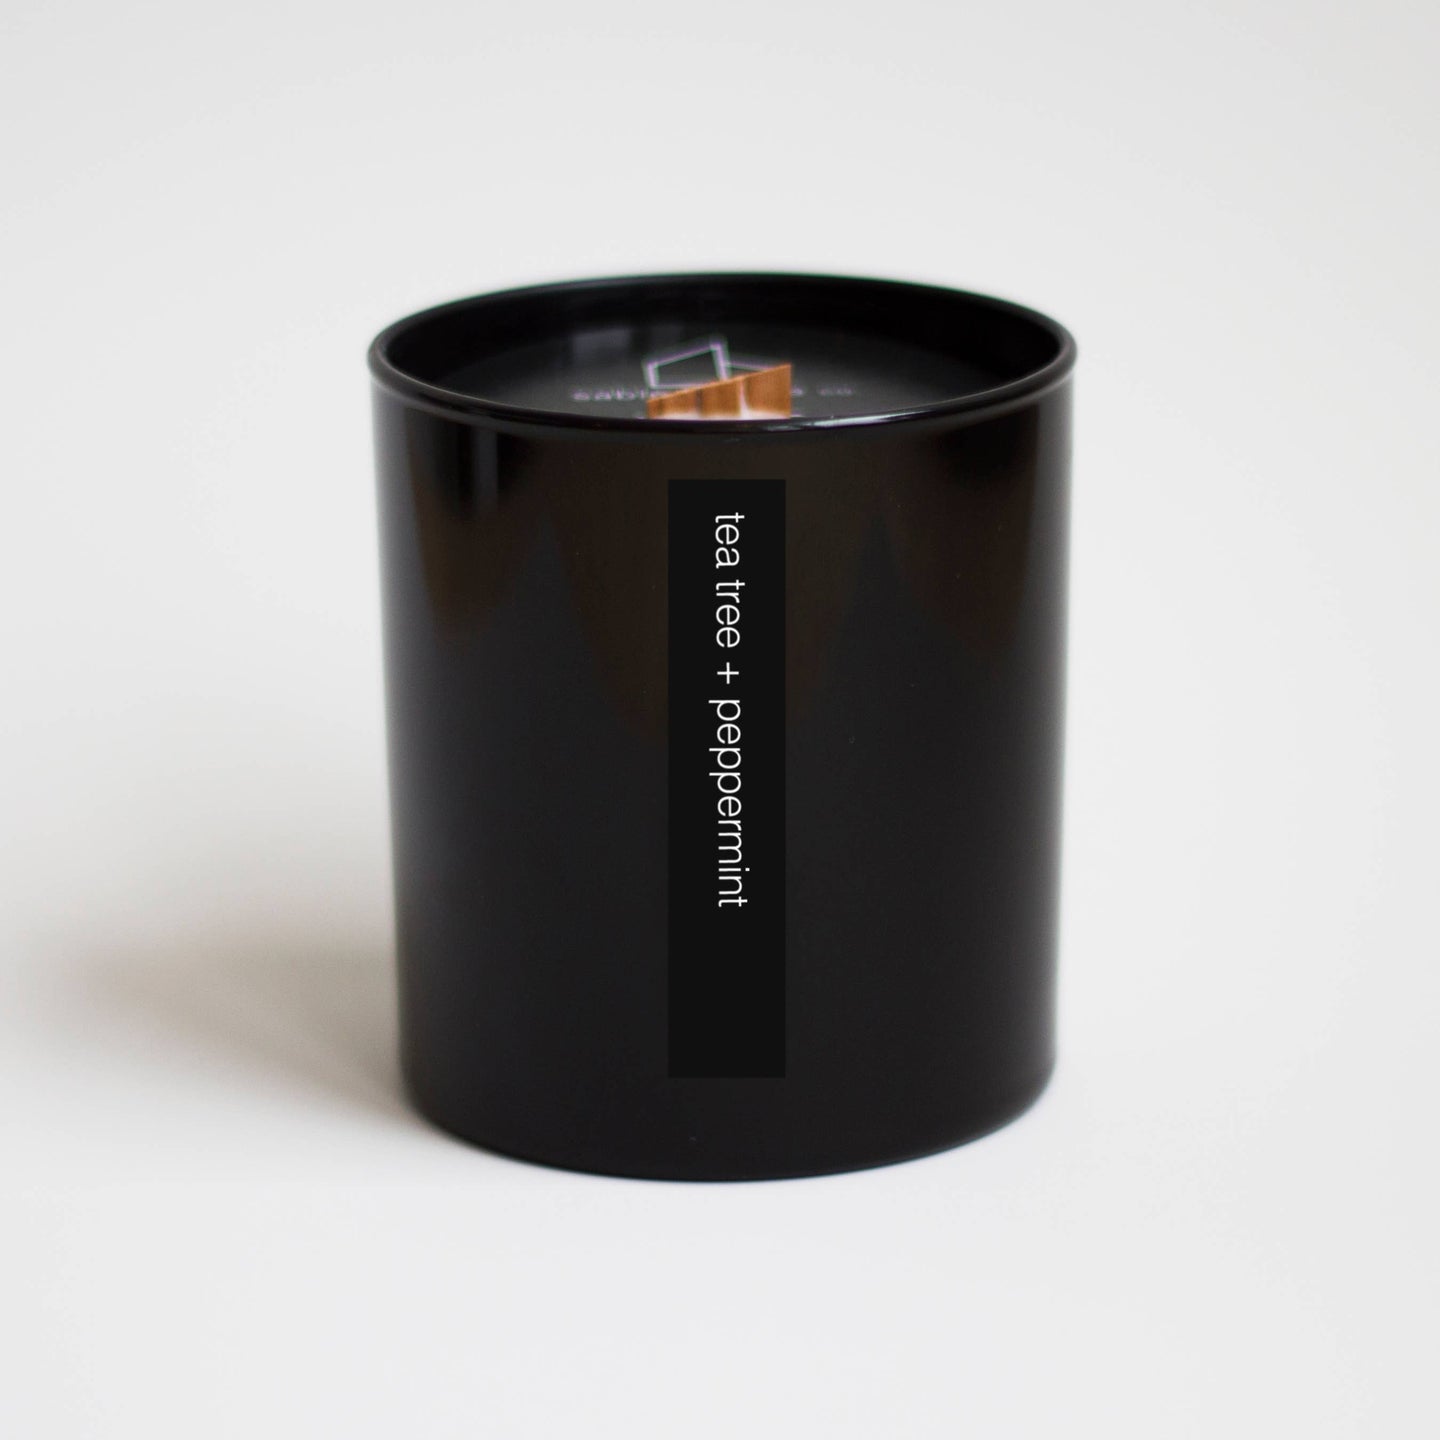 Sable Candle Co - tea tree + peppermint tumbler candle